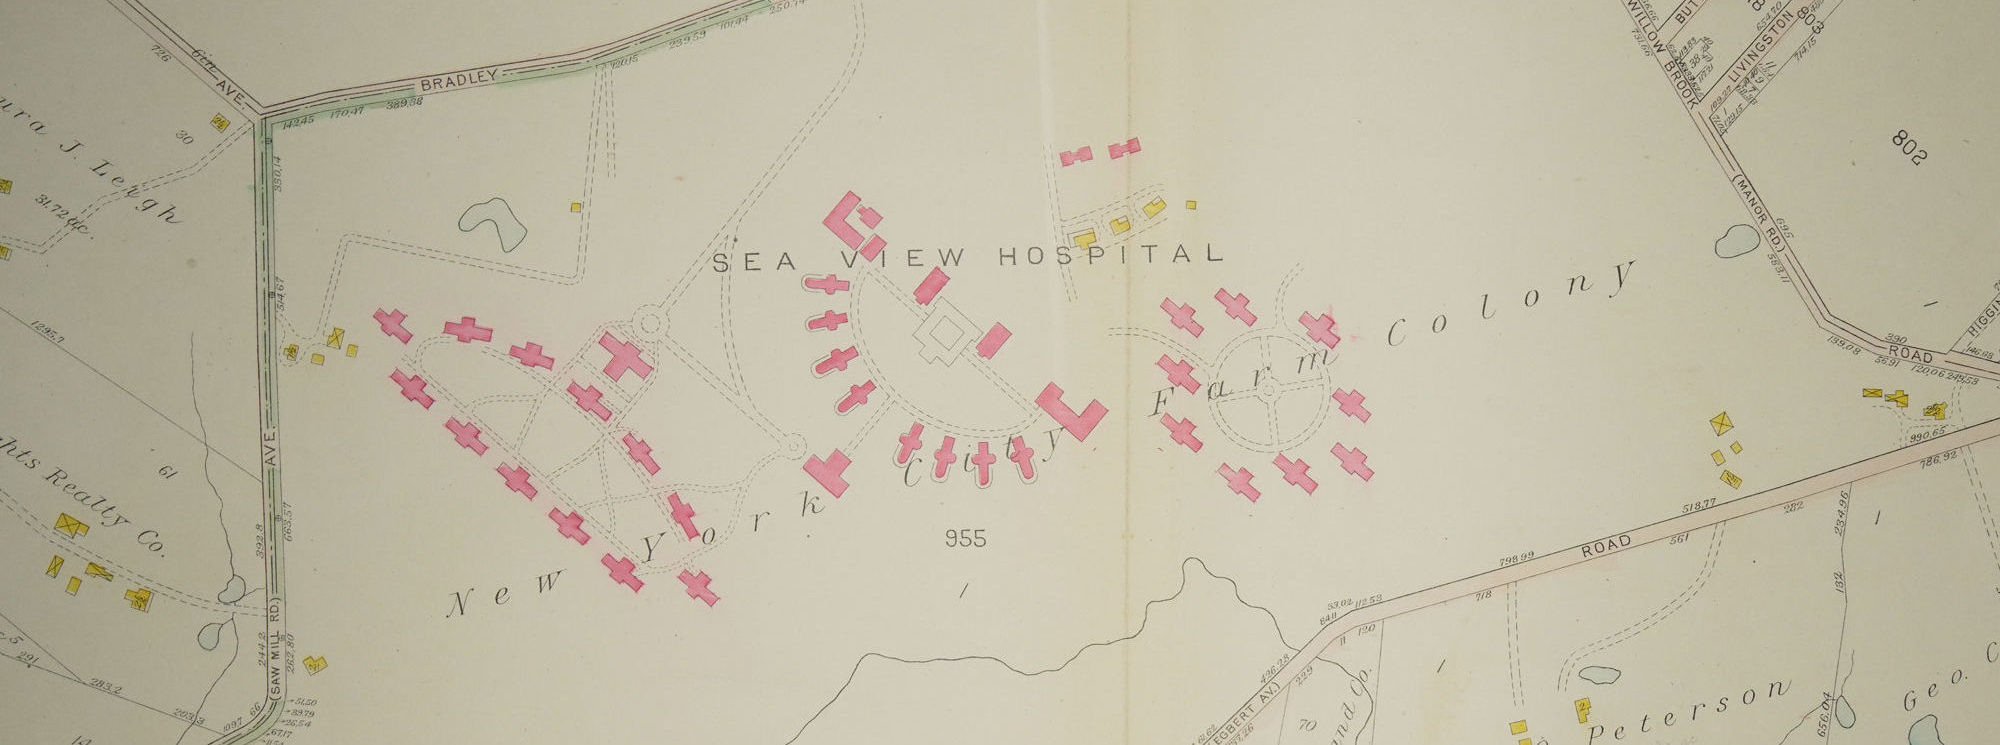 Map of the Grounds of Seaview Hospital